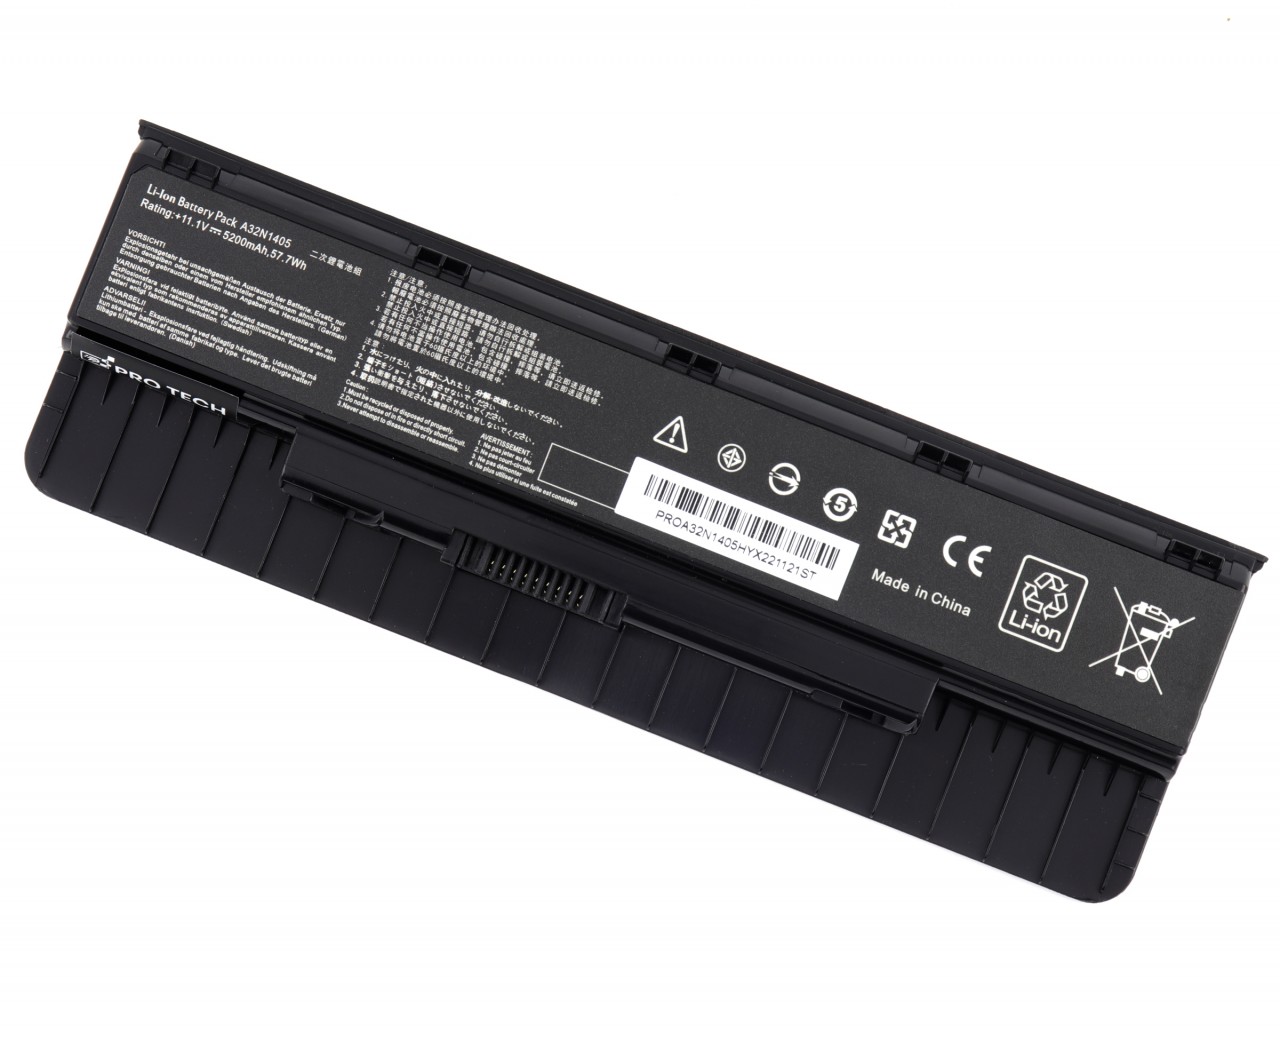 Baterie Asus N751JM 57.7Wh / 5200mAh Protech High Quality Replacement